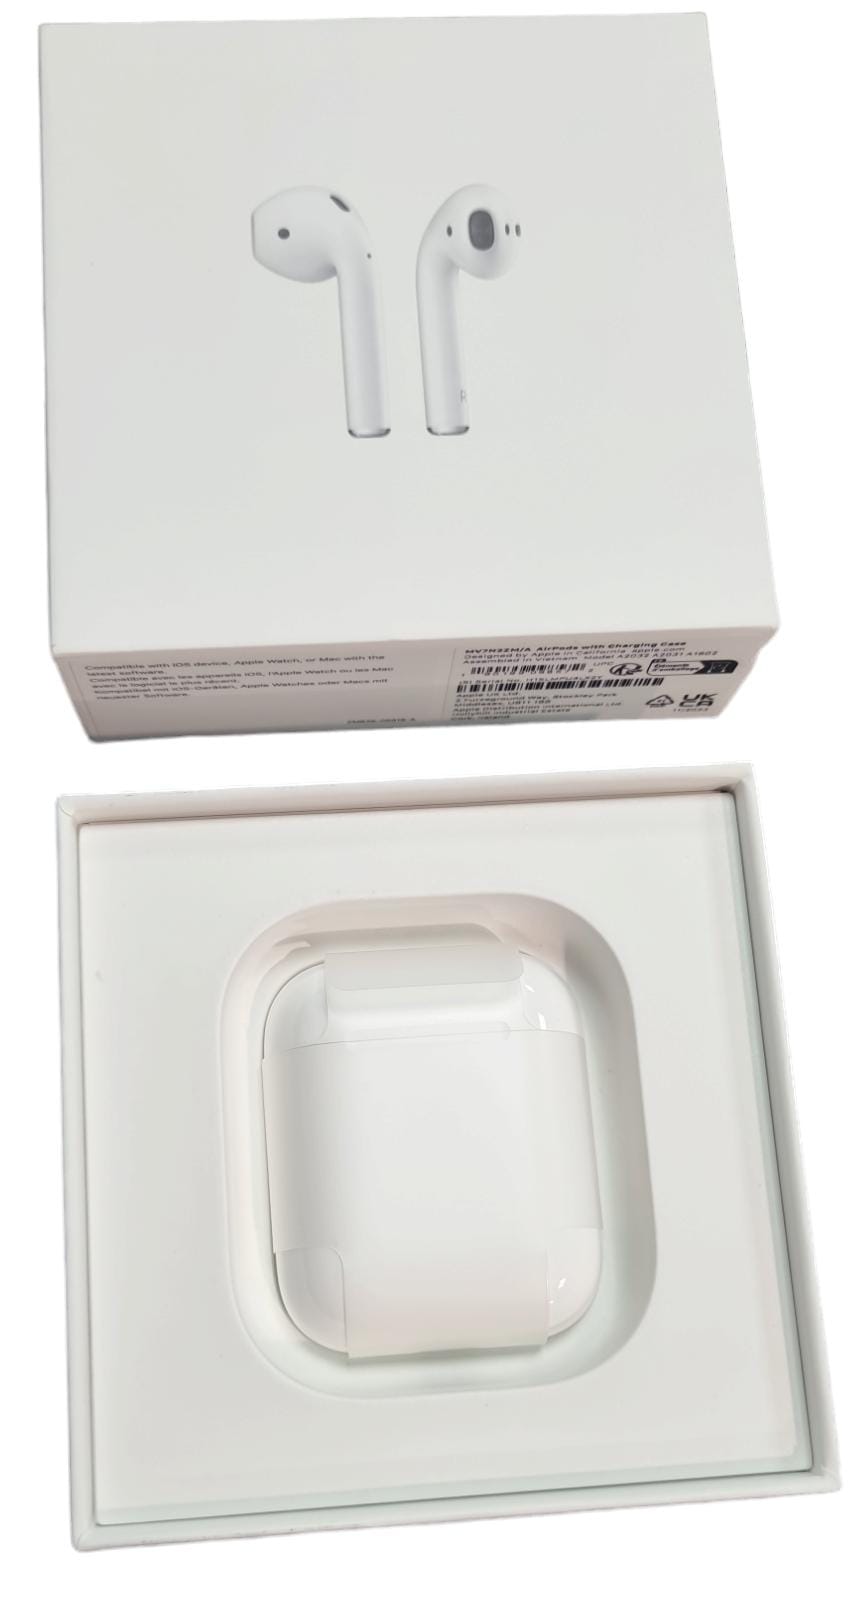 Apple Airpods 2nd Generation with charging case - MV7N2ZM/A - Boxed